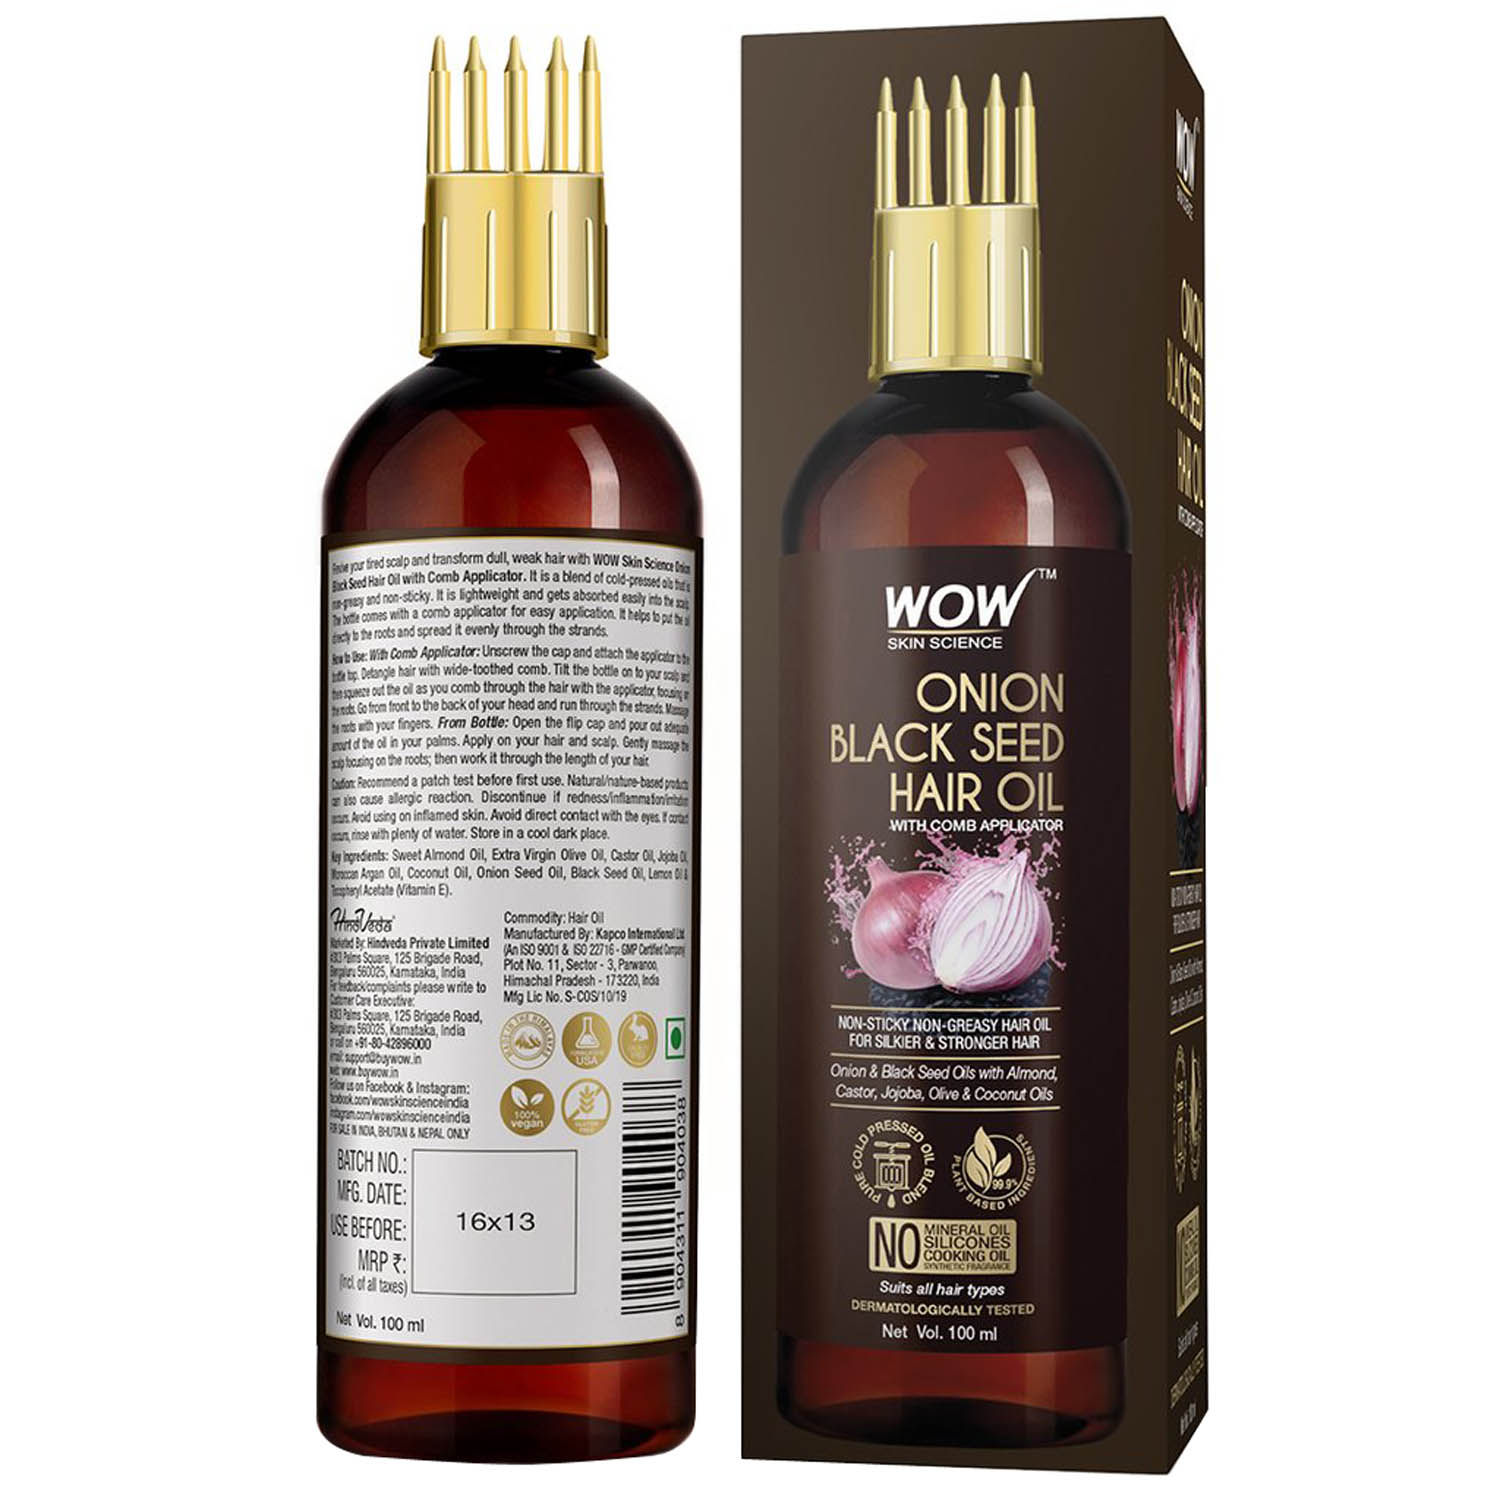 Wow Skin Science Onion Black Seed Hair Oil, 100 ml Price, Uses, Side  Effects, Composition - Apollo Pharmacy